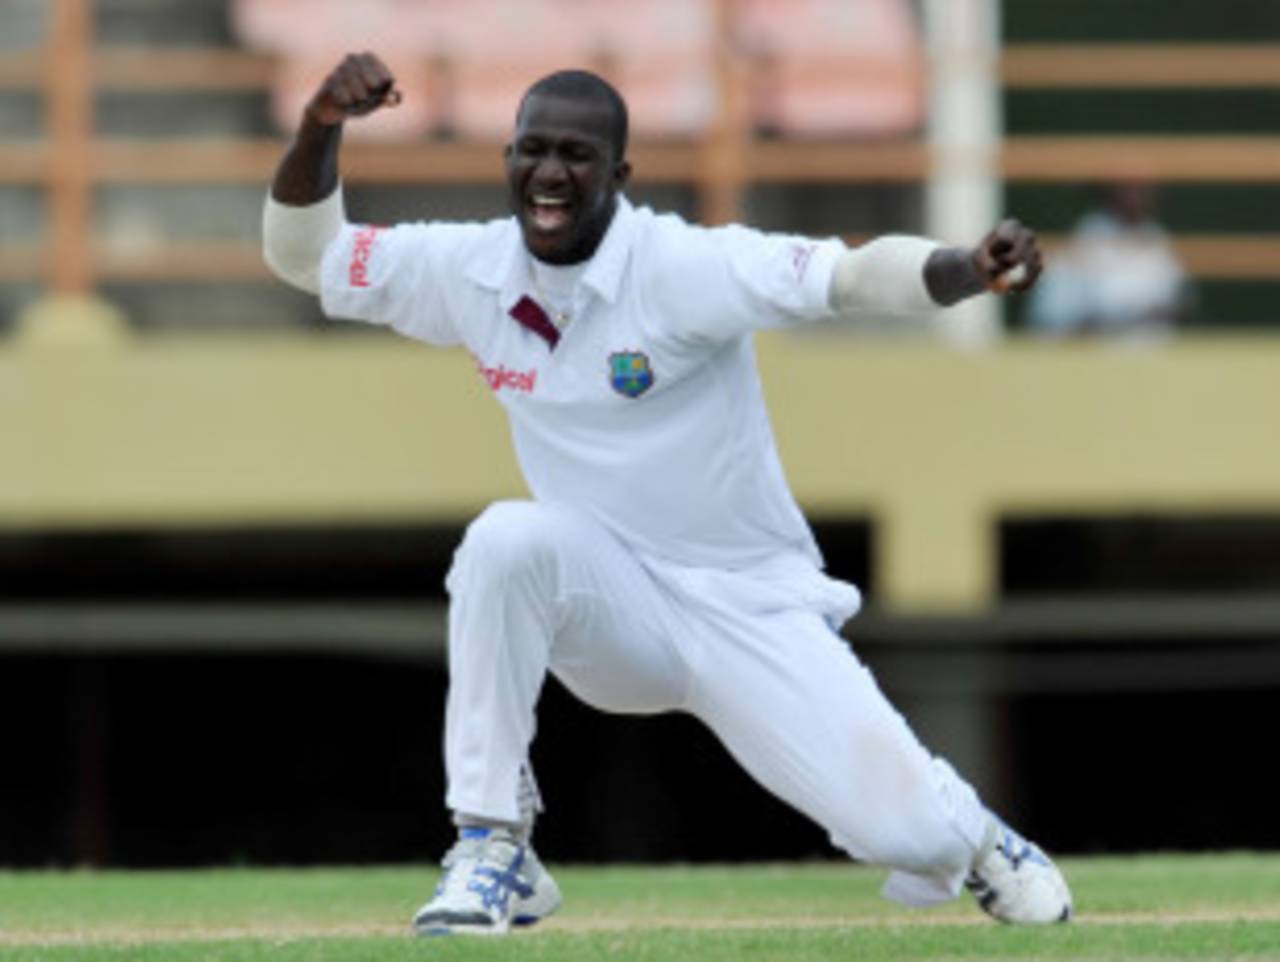 Darren Sammy is clearly thrilled at taking the wicket of Taufeeq Umar, West Indies v Pakistan, 1st Test, Providence, 2nd day, May 13, 2011